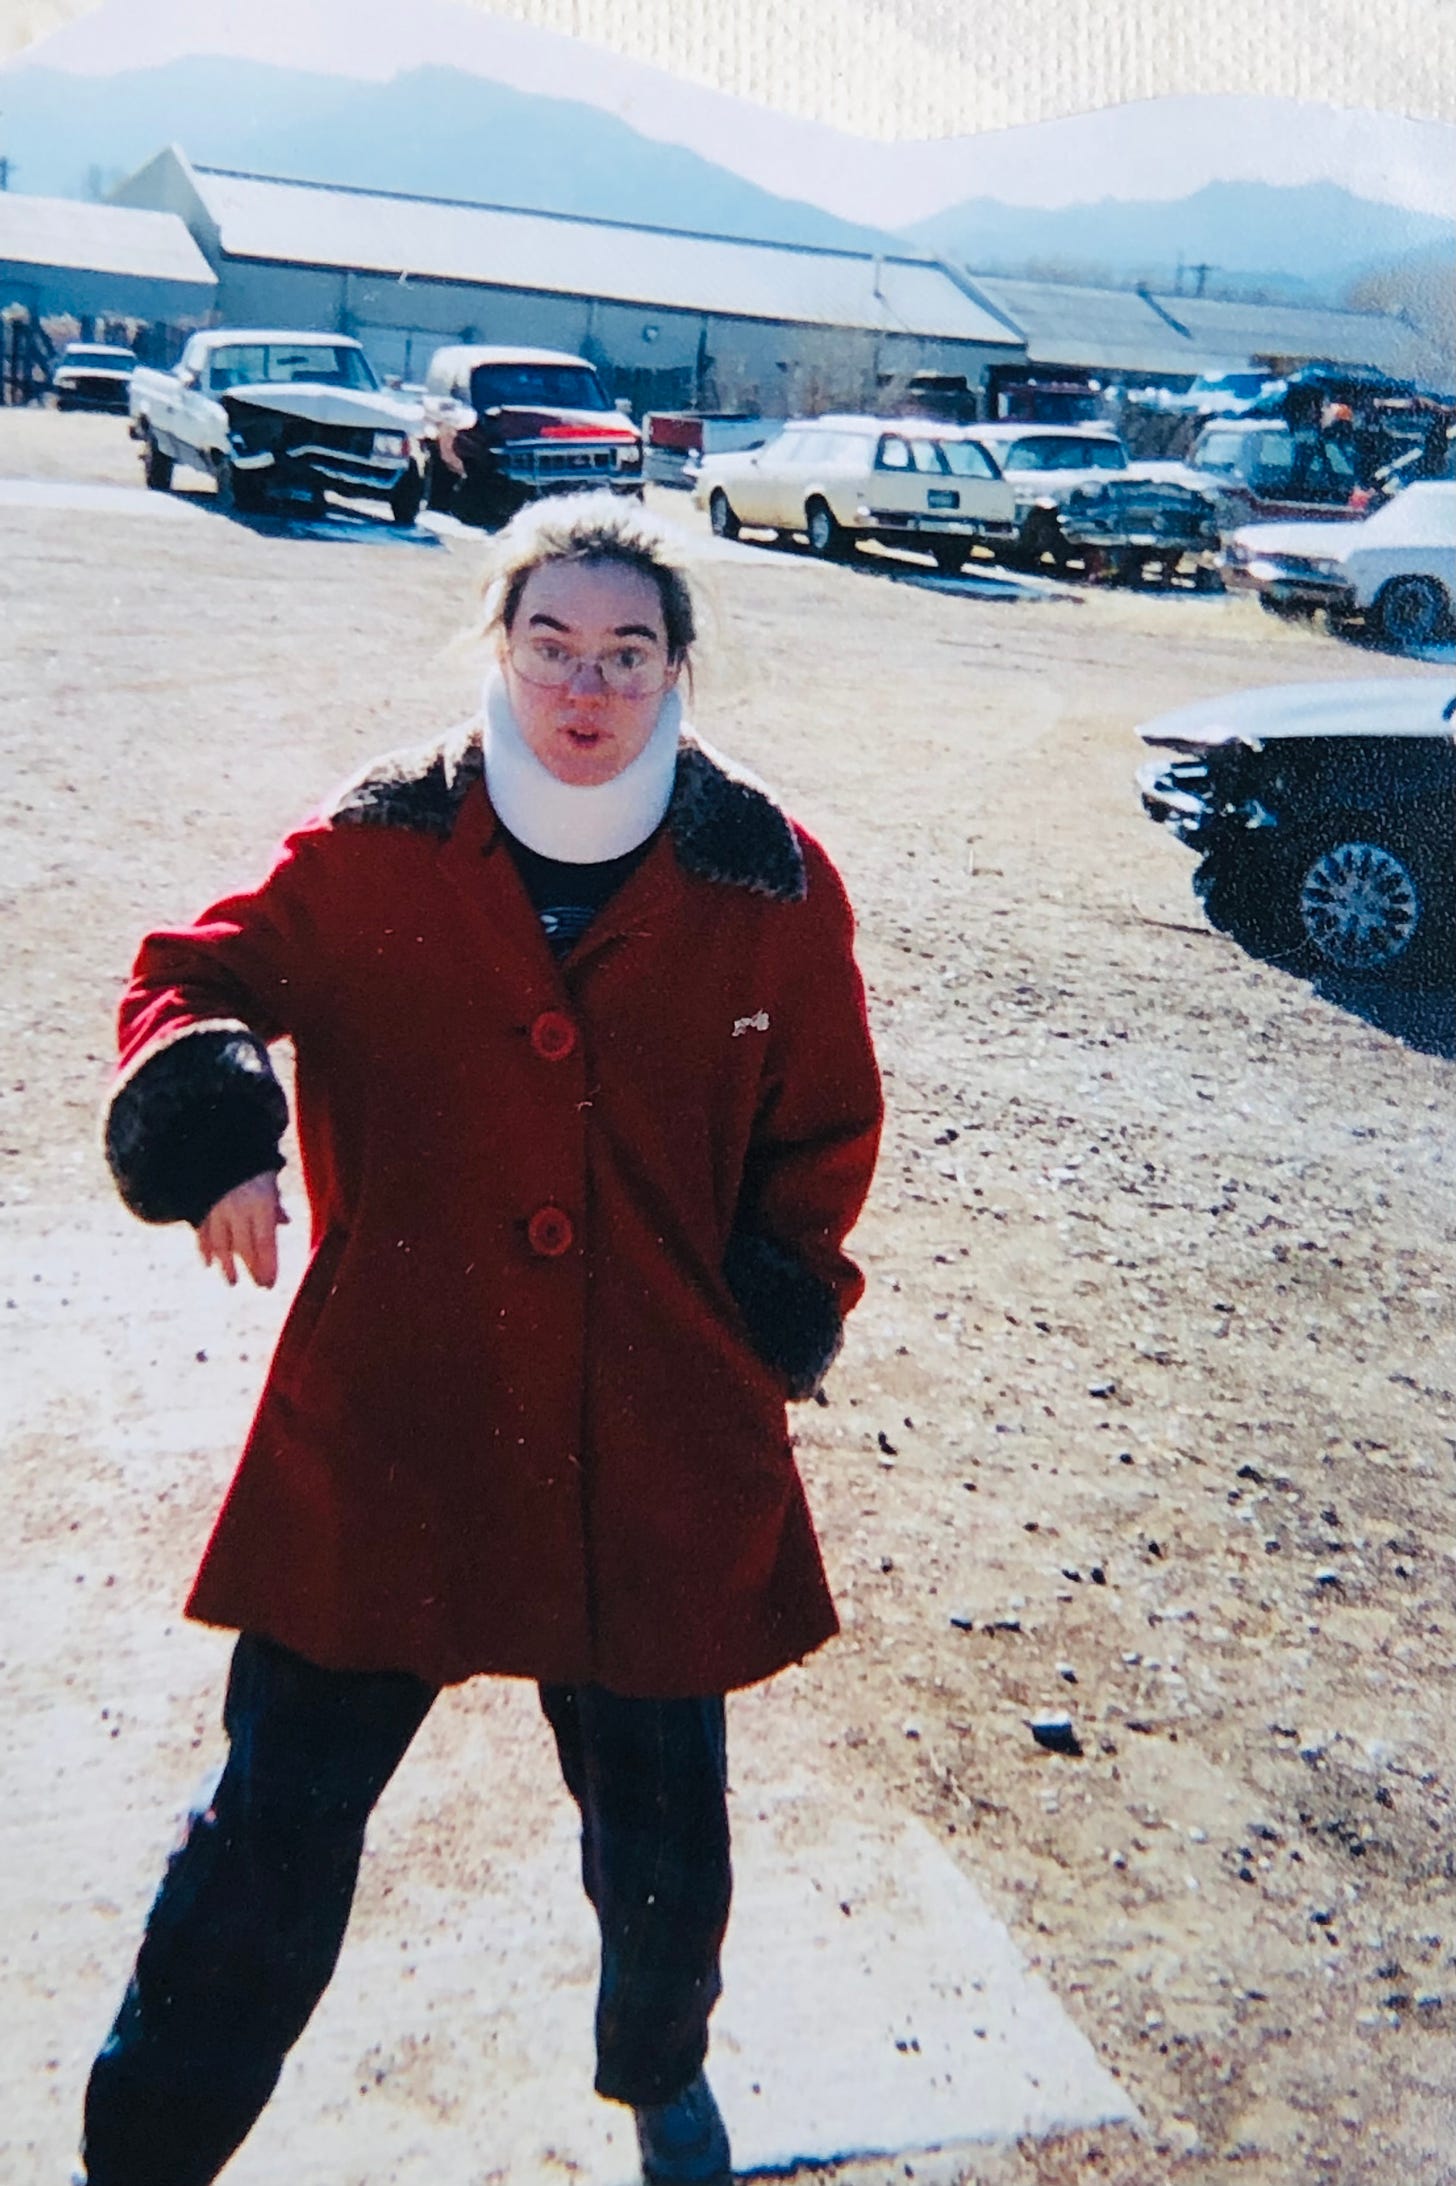 The slack-jawed, huge-eyed author in a neck brace, glasses, sweats and messy hair, as well as a swanky red coat with faux leopard trim. Looking like a startled cat amidst a slew of totaled vehicles with the Colorado mountains in the background. 